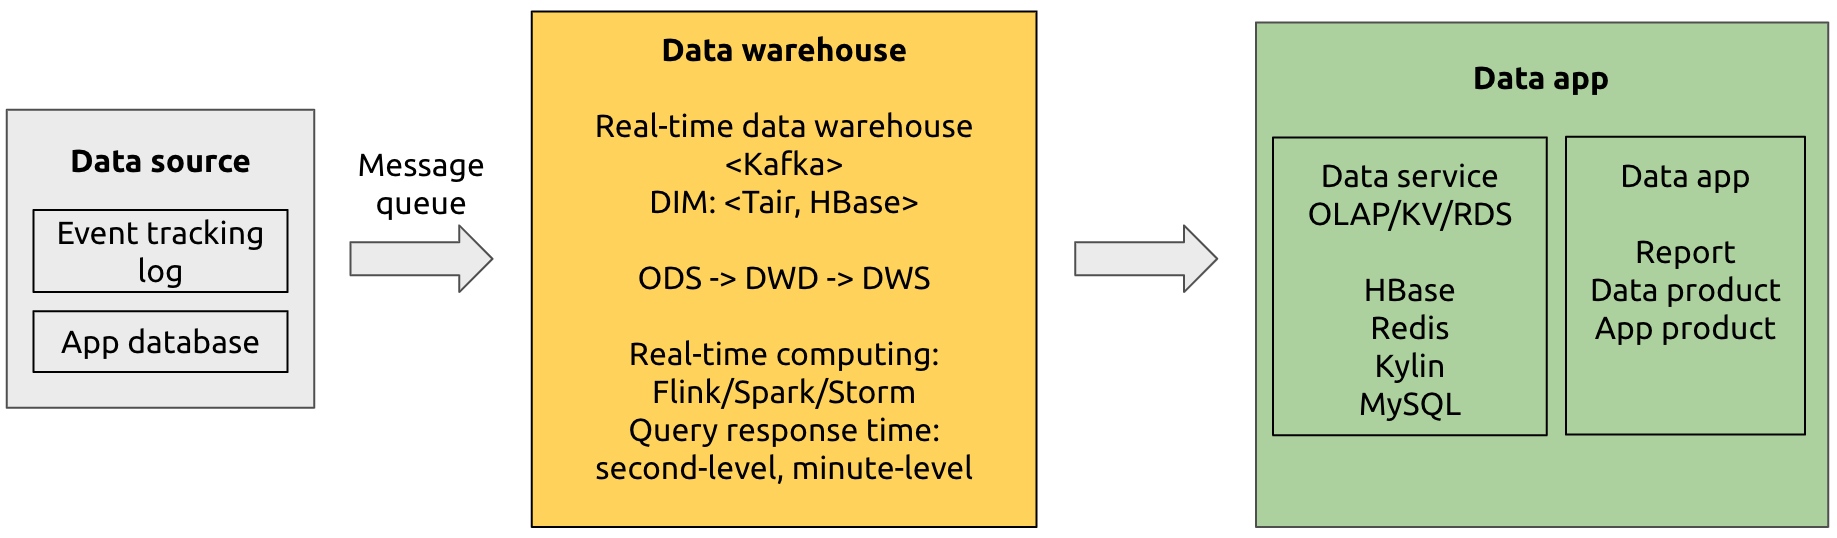 Kappa architecture for real-time data warehousing